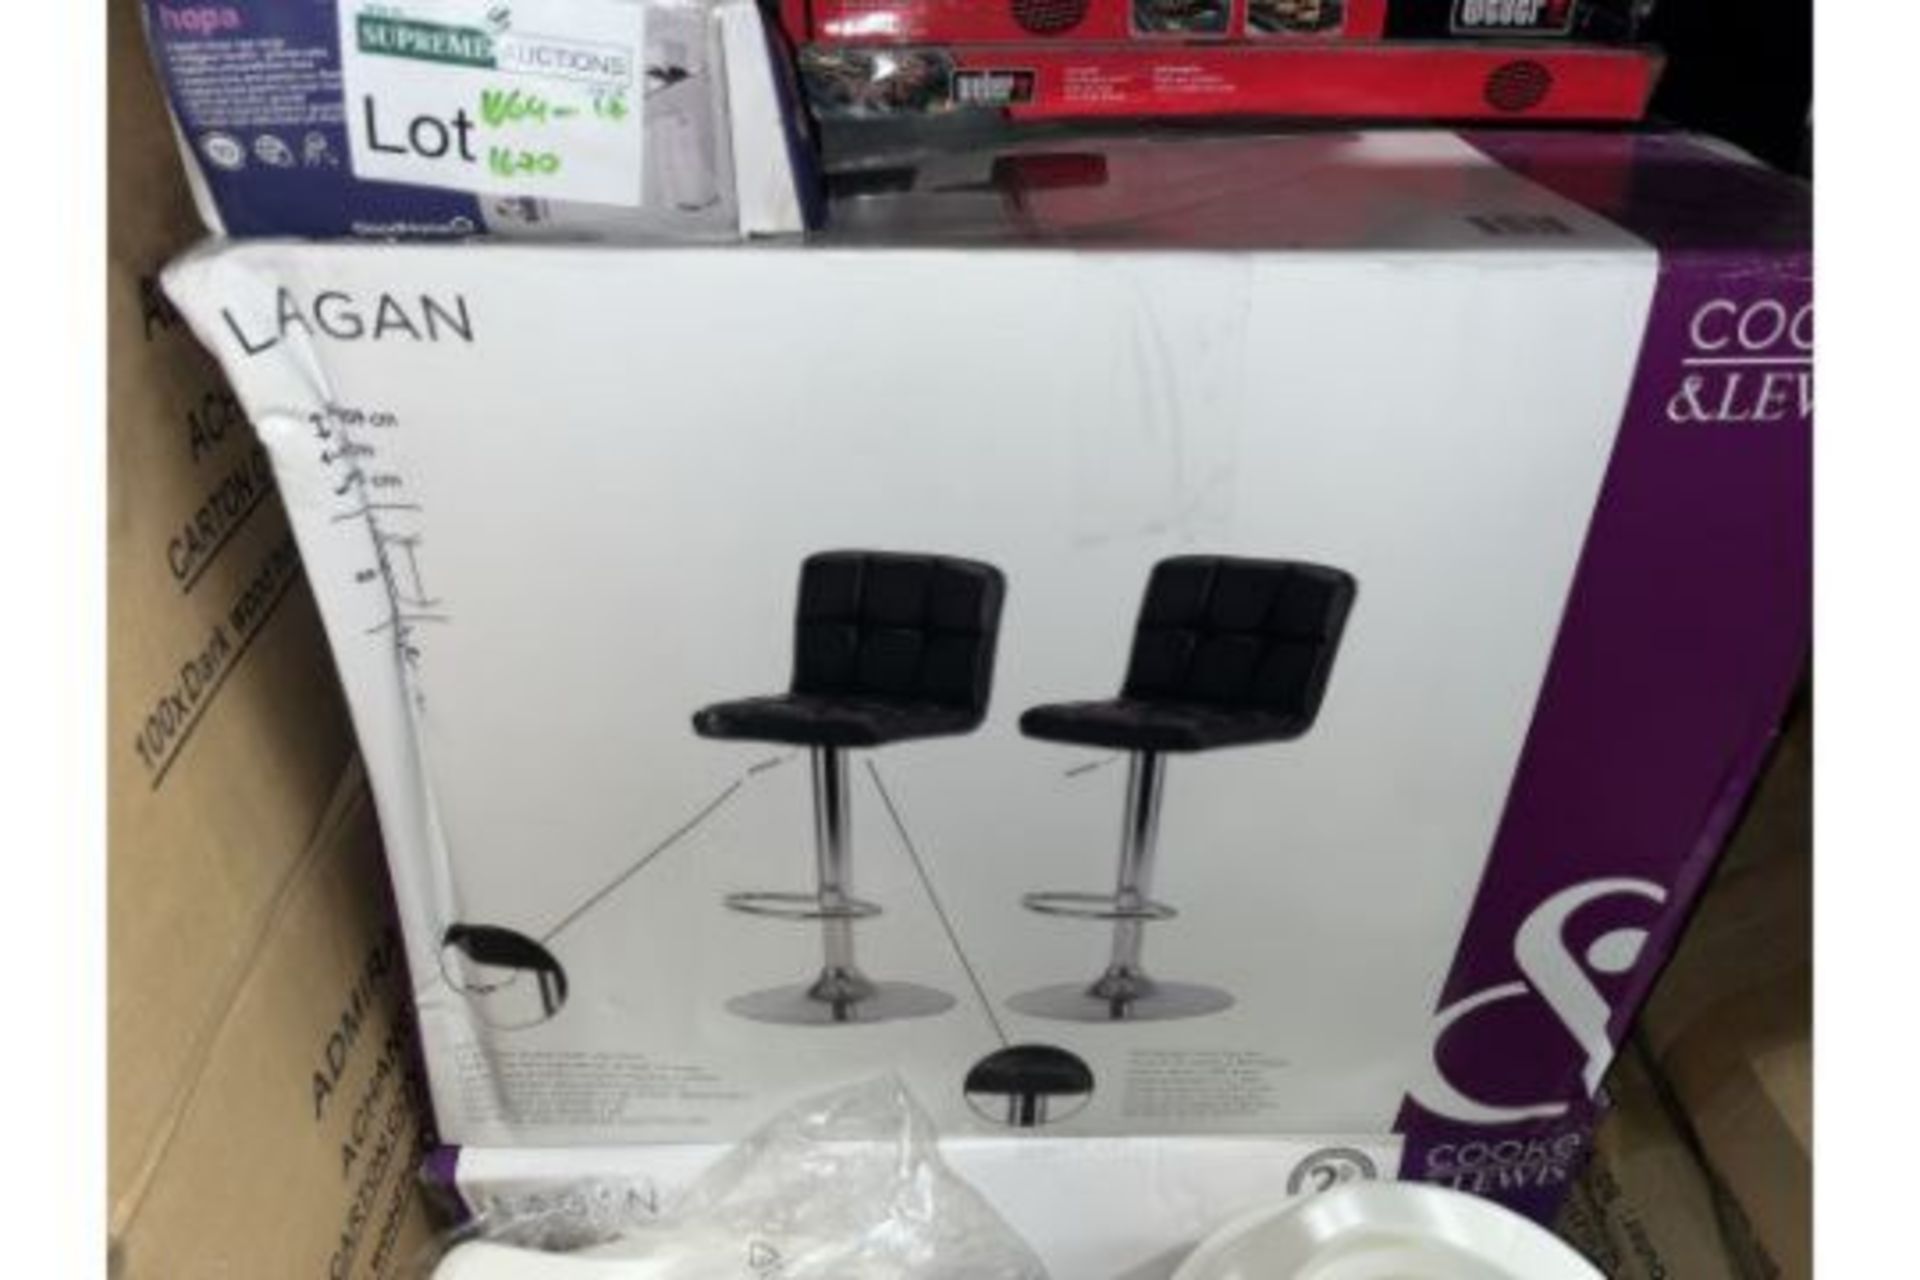 COOKE & LEWIS 2 PACK OF LAGAN BARSTOOLS BLACK - ROW6.6 (BOXES MAY HAVE WATER DAMAGE)